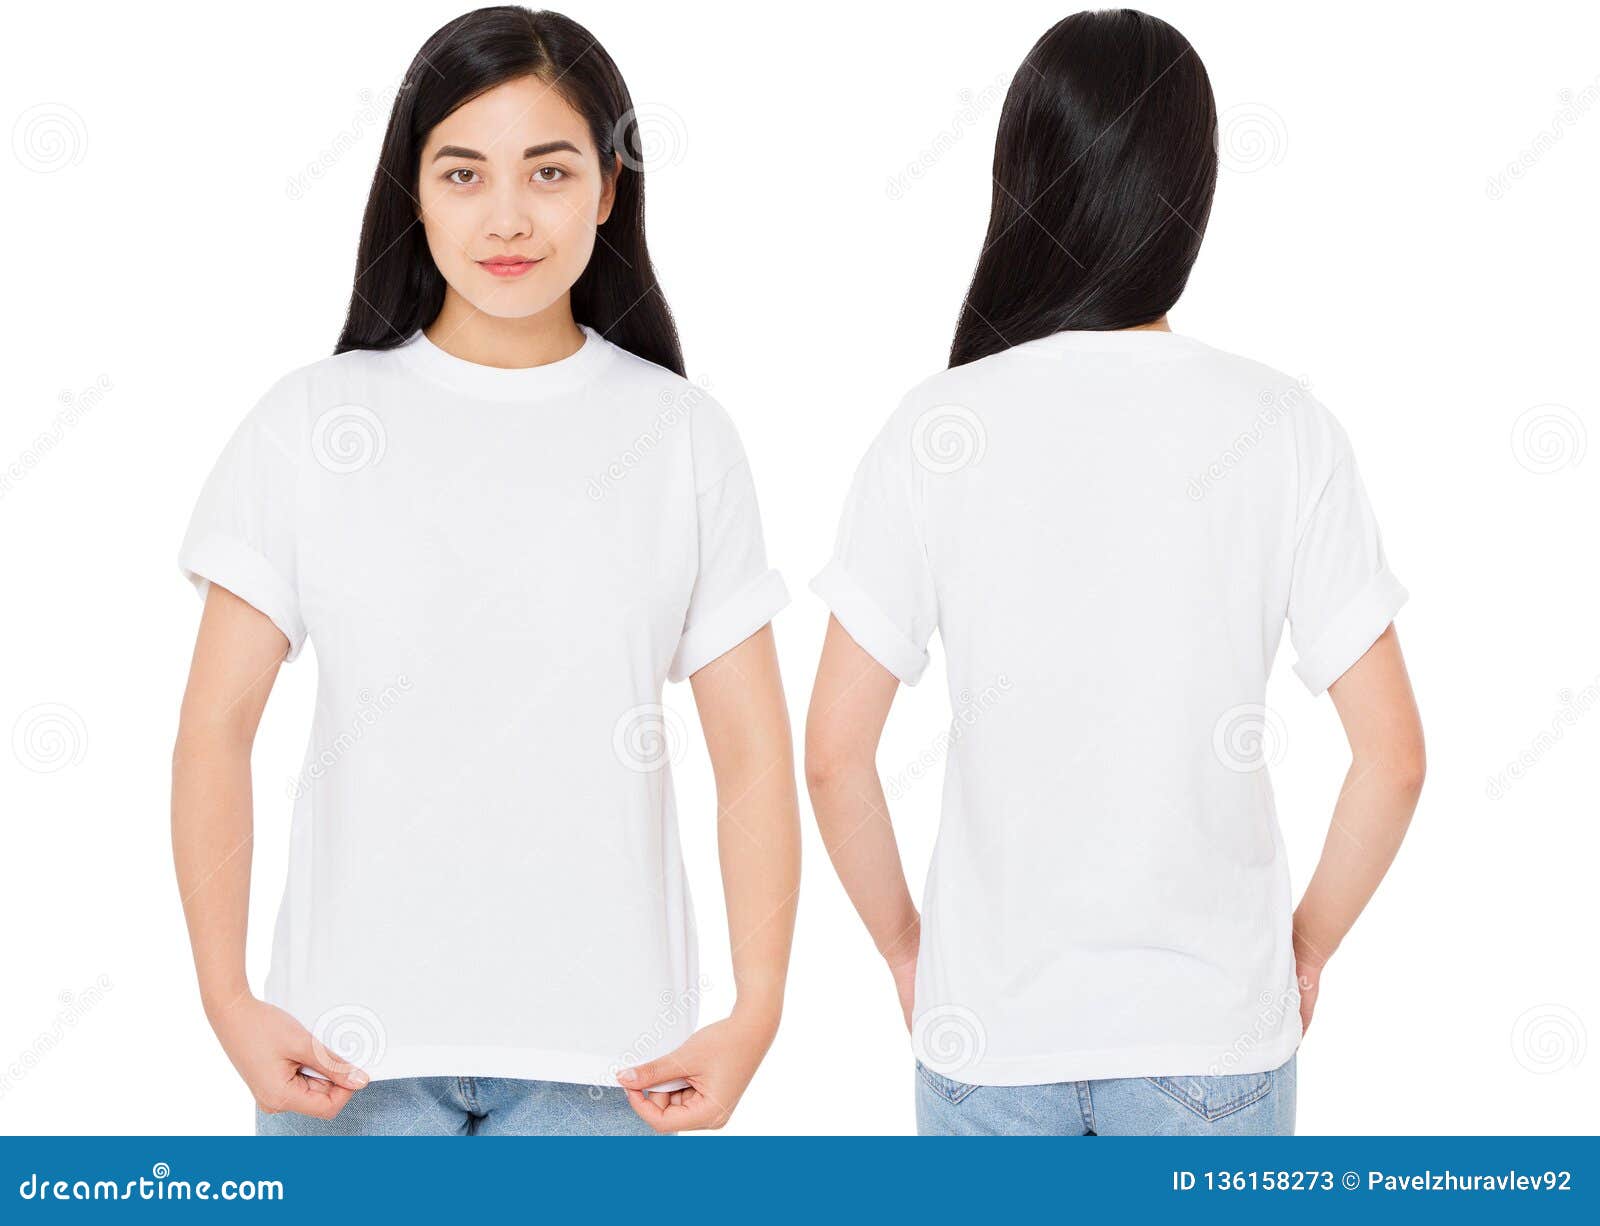 Download 5 519 Woman T Shirt Mockup Photos Free Royalty Free Stock Photos From Dreamstime